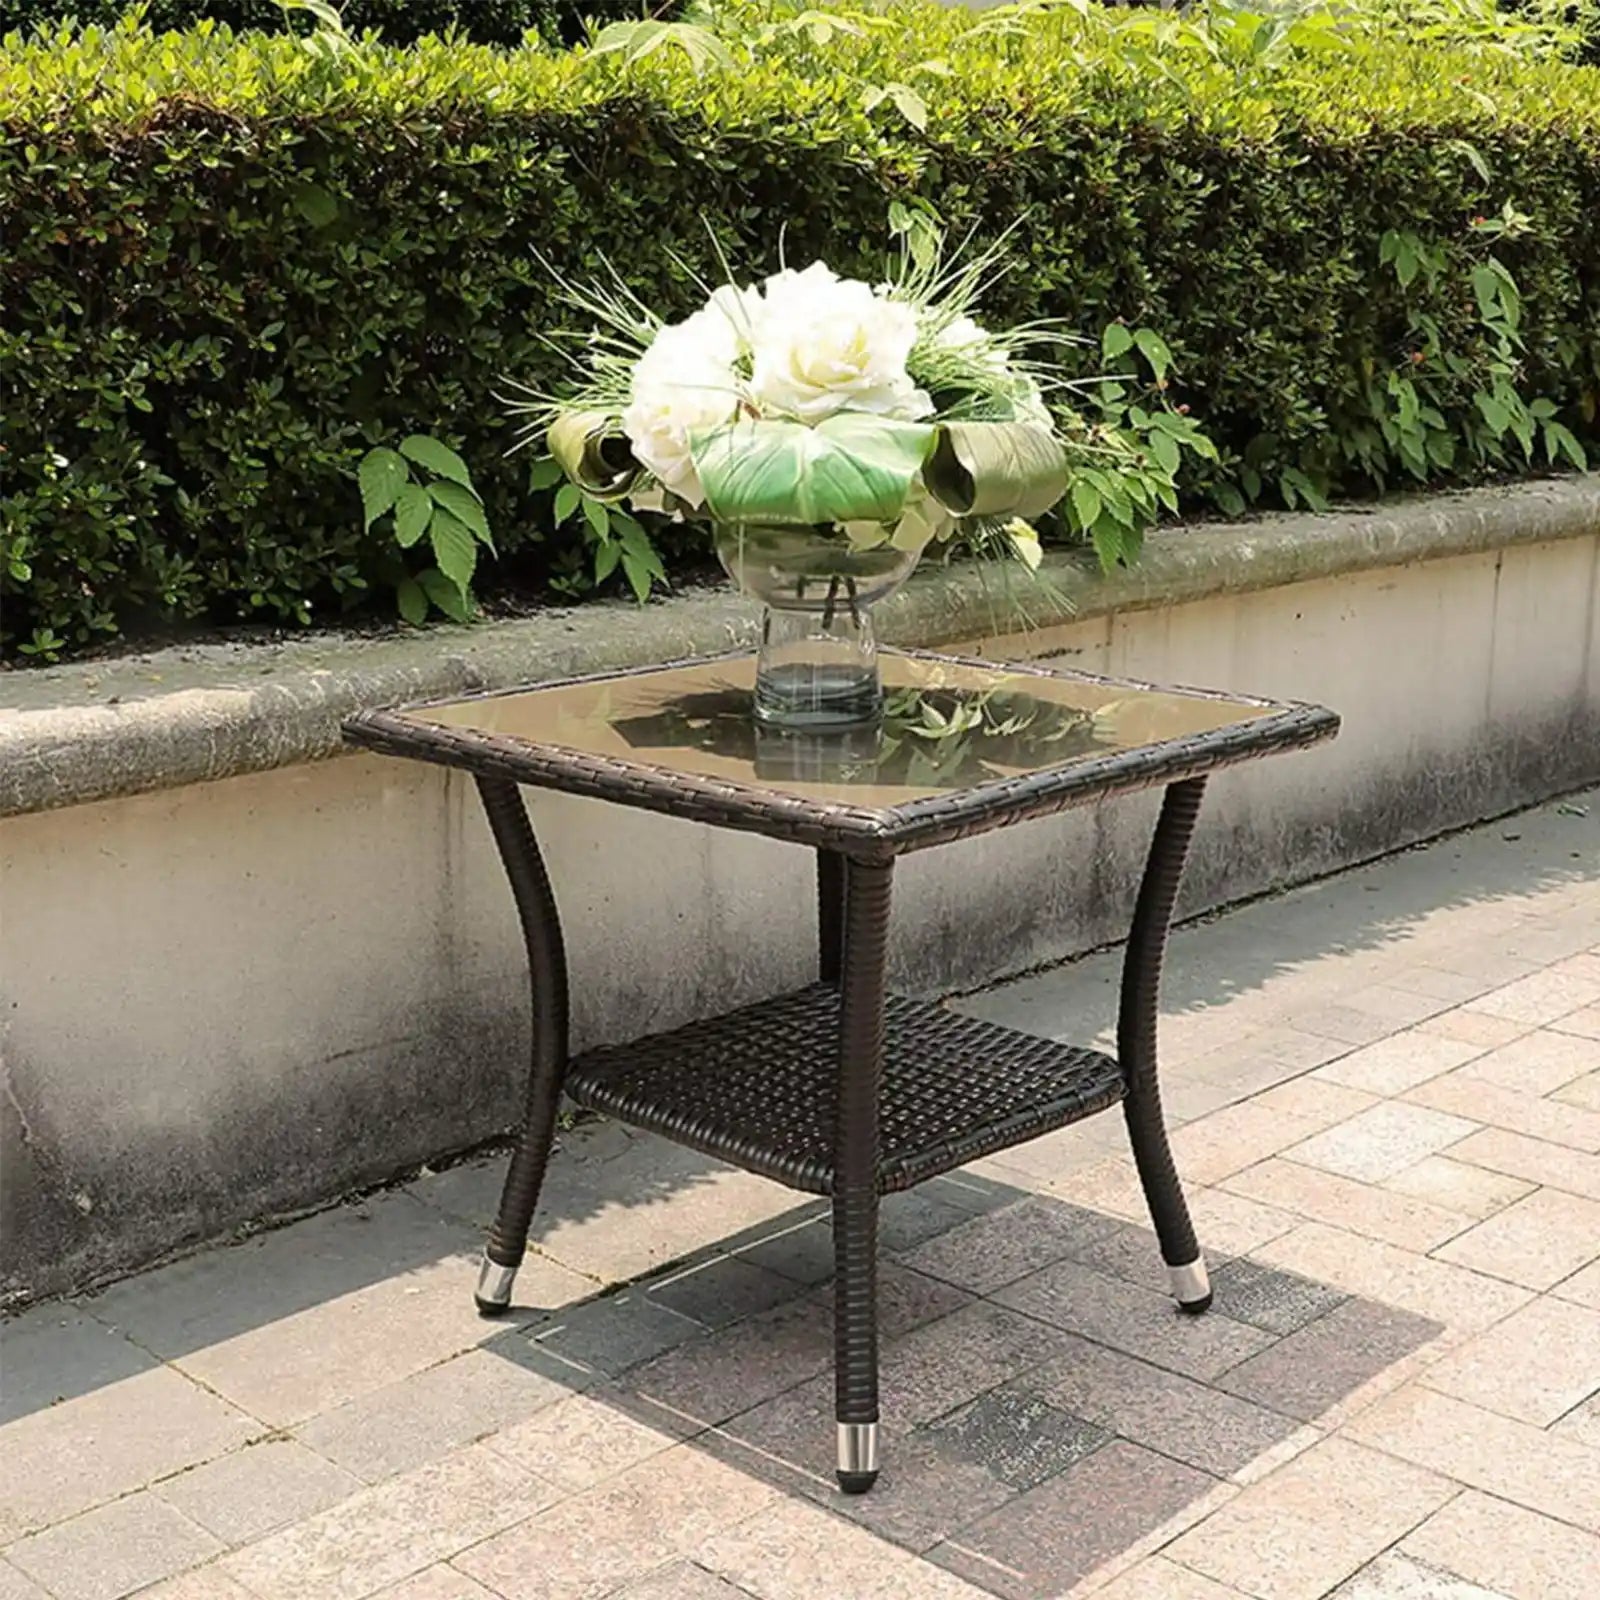 Outdoor Wicker End Table Square Glass Top Rattan Coffee Table with Storage for Patio Garden